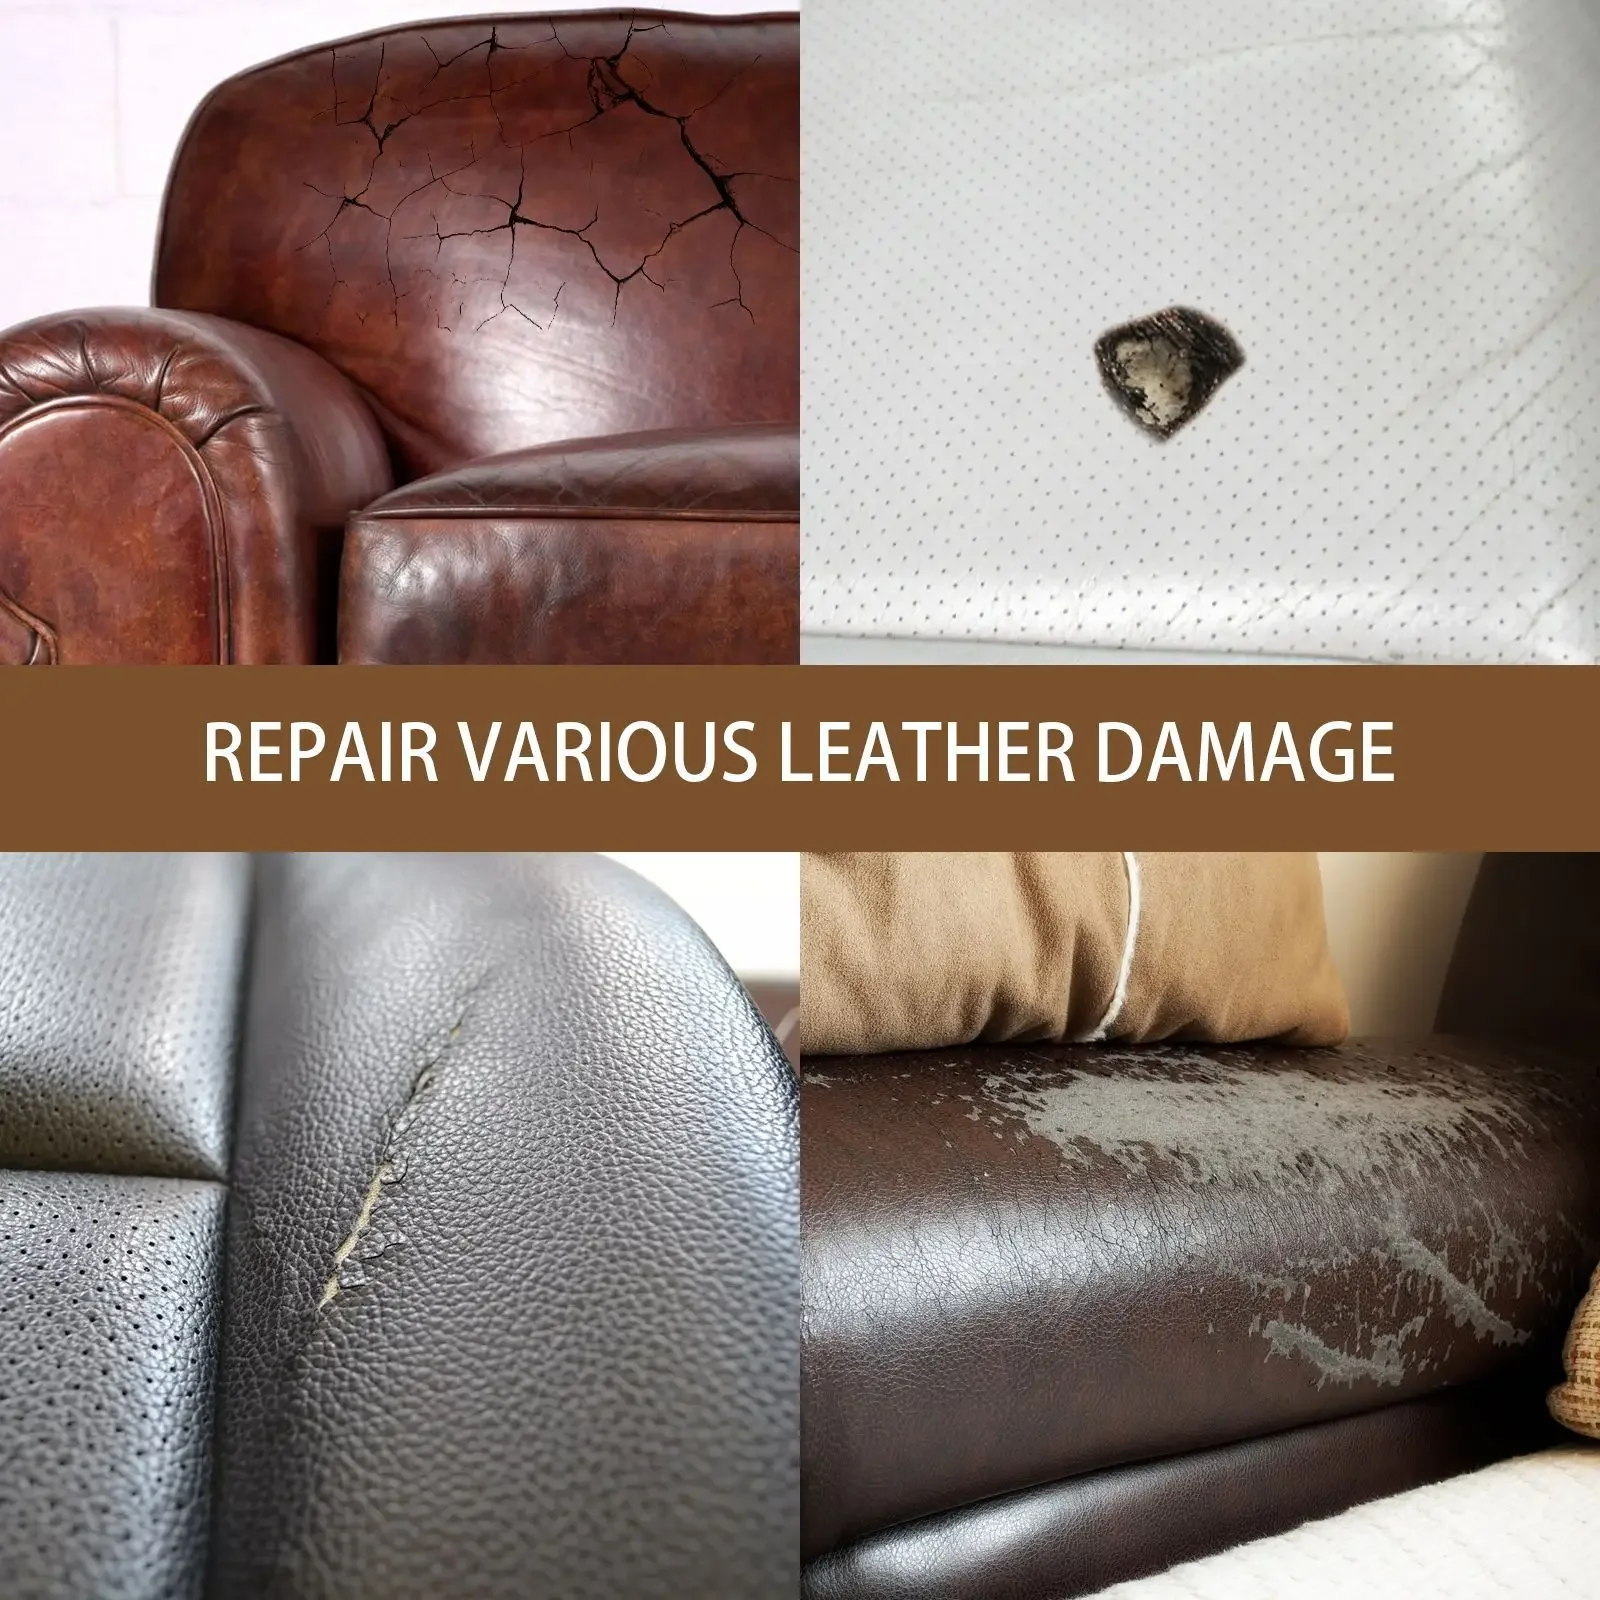 50ml Advanced Leather Repair Gel Repairs Burns Holes Gouges For Leather  Surface Sofa Car Seat Complementary Refurbish Cream - AliExpress